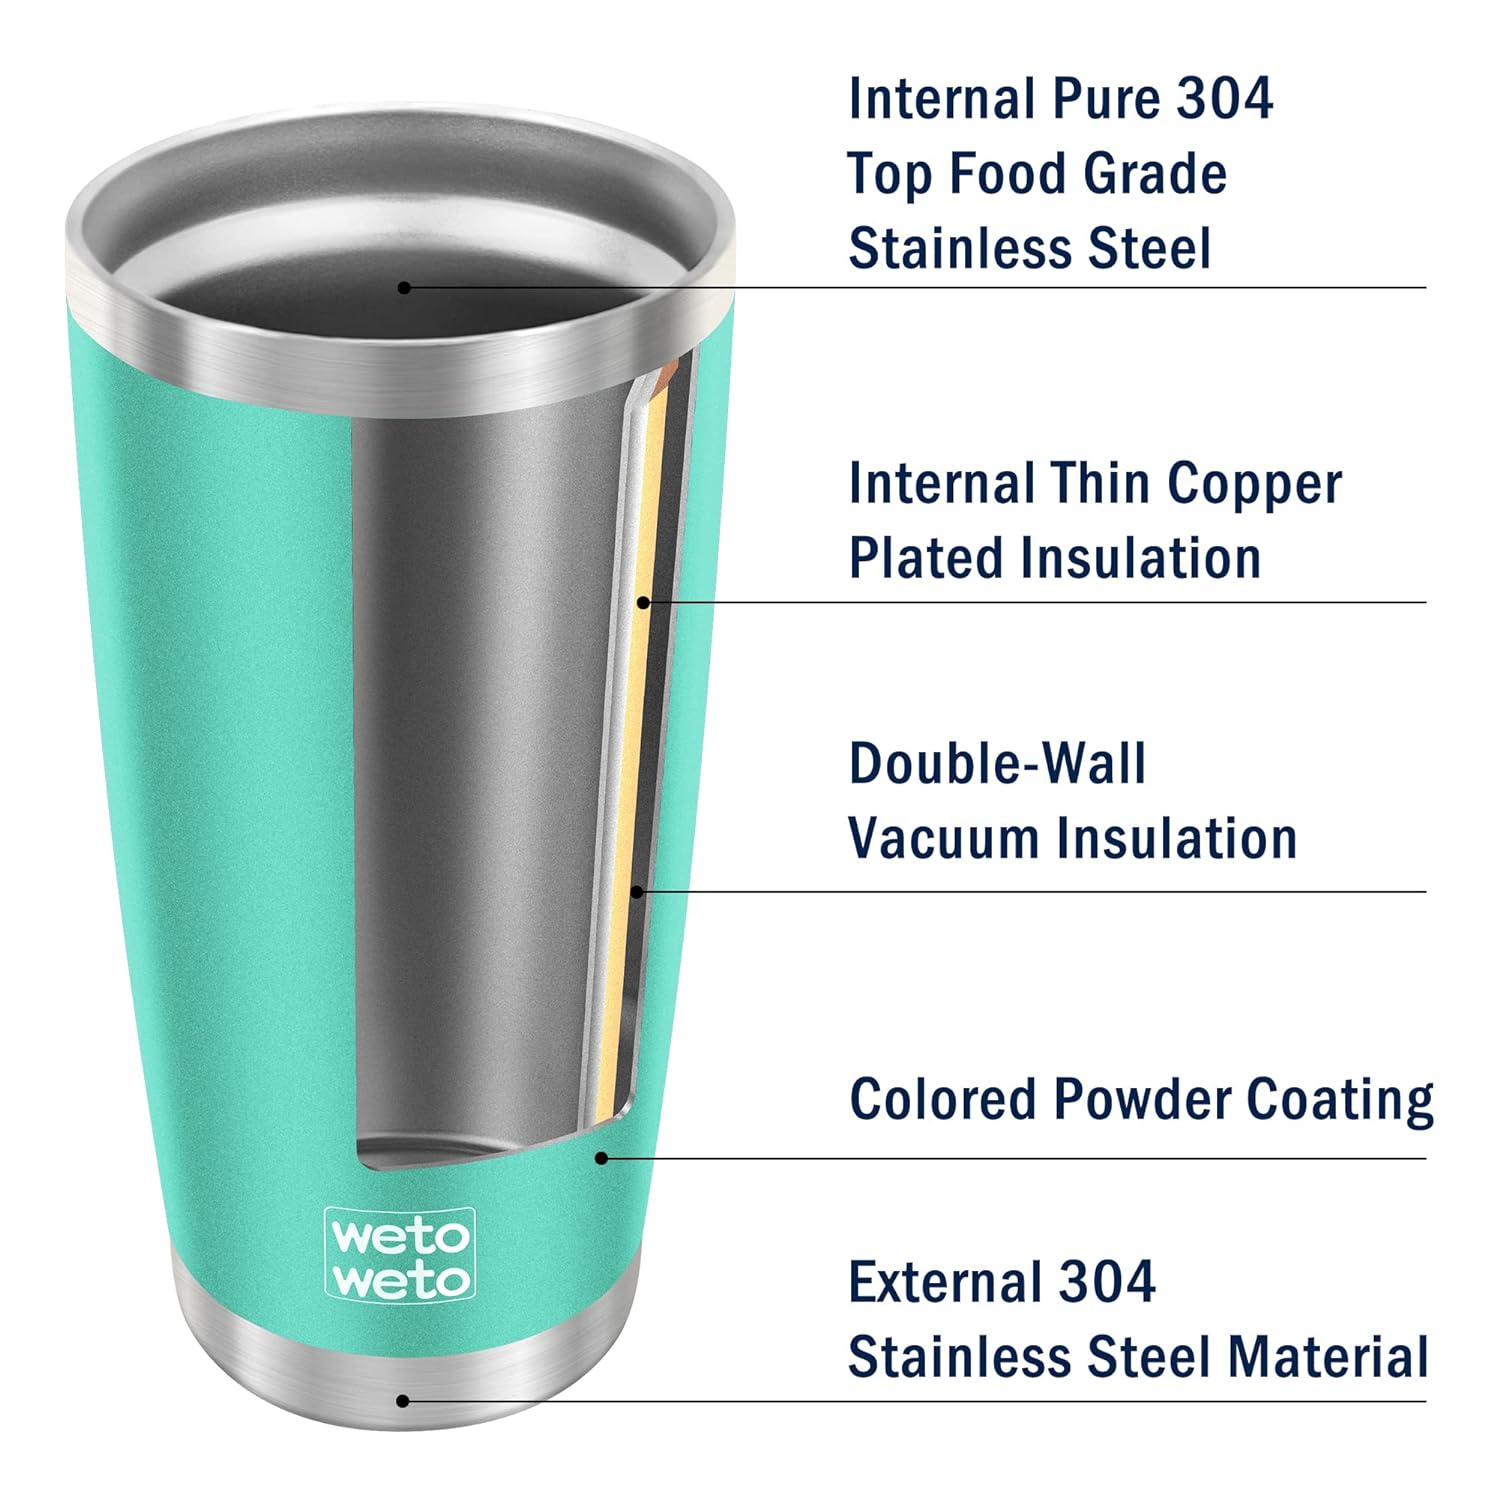 WETOWETO 20oz Tumbler with 2 lids and 2 straws, Stainless Steel Vacuum Insulated Coffee Tumbler Cup, Double Wall Powder Coated Travel Mug (Cyan, 1 Pack)